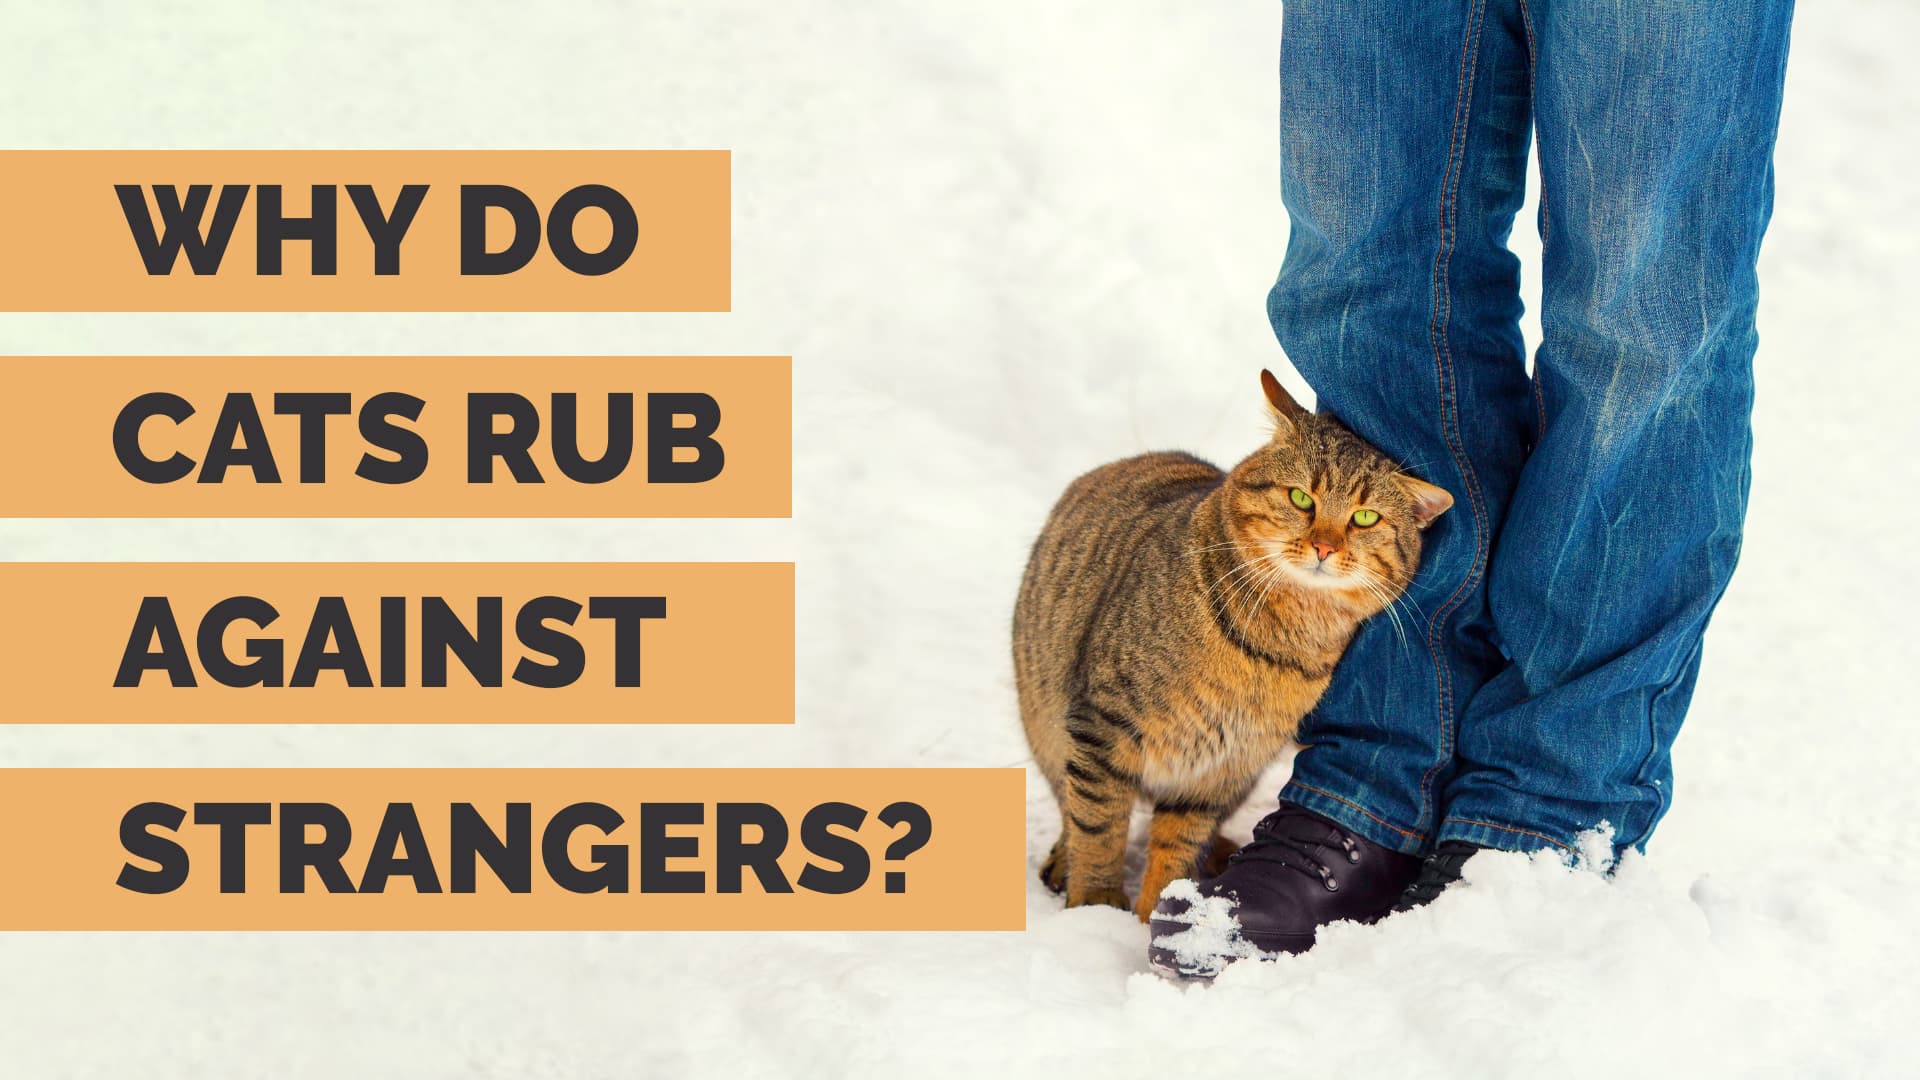 Why do cats rub against strangers